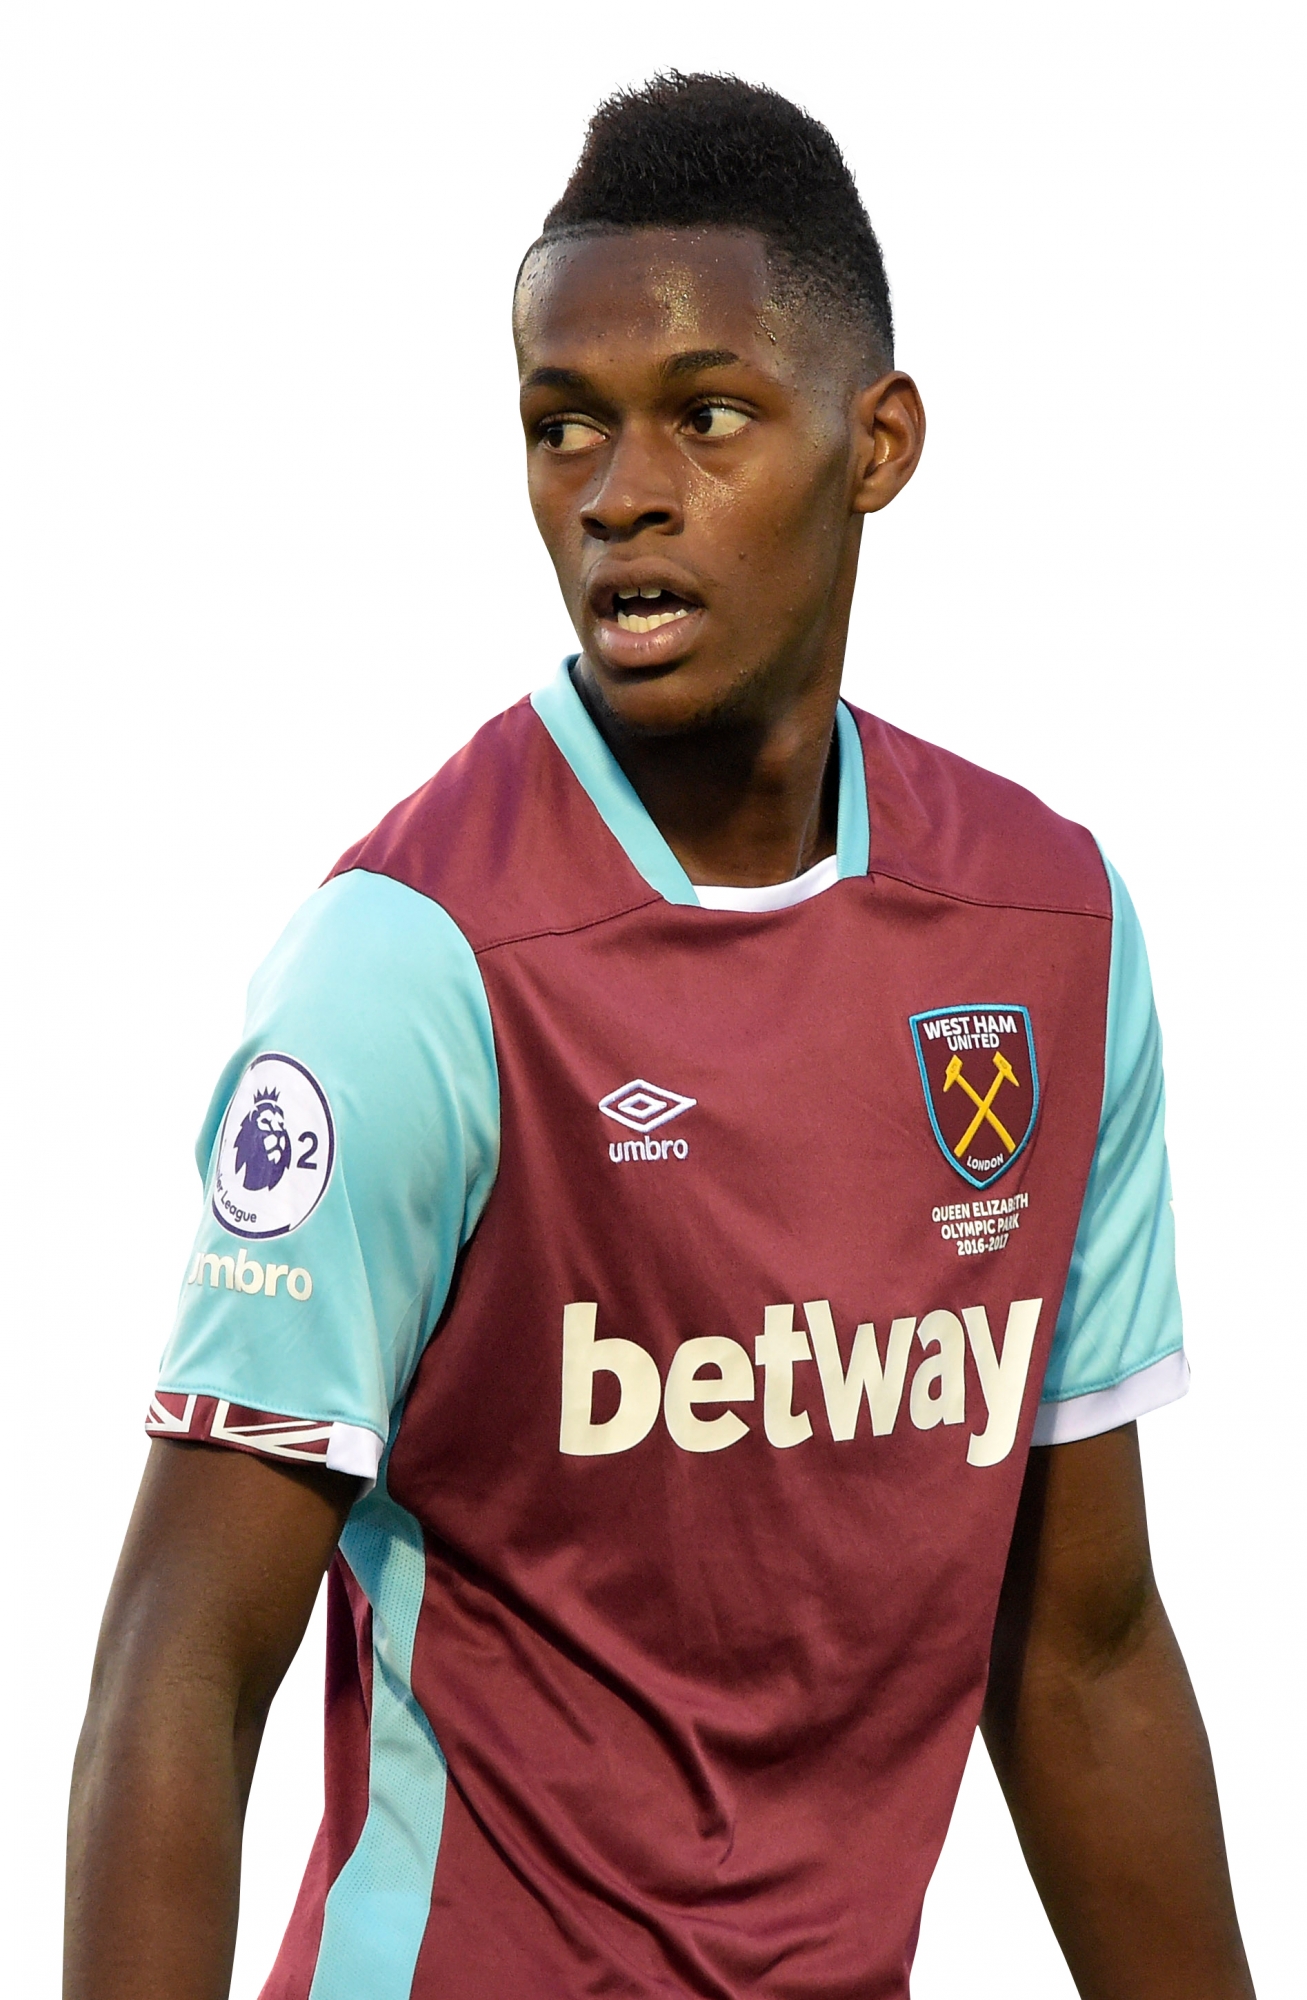 DAGENHAM, ENGLAND - SEPTEMBER 09:  Edimilson Fernandes of West Ham United in action during the PL2 match between West Ham United and Wolverhampton Wanderers at Chigwell Construction Stadium on September 9, 2016 in Dagenham, England.  (Photo by Arfa Griffiths/West Ham United via Getty Images)fernandes 92203560